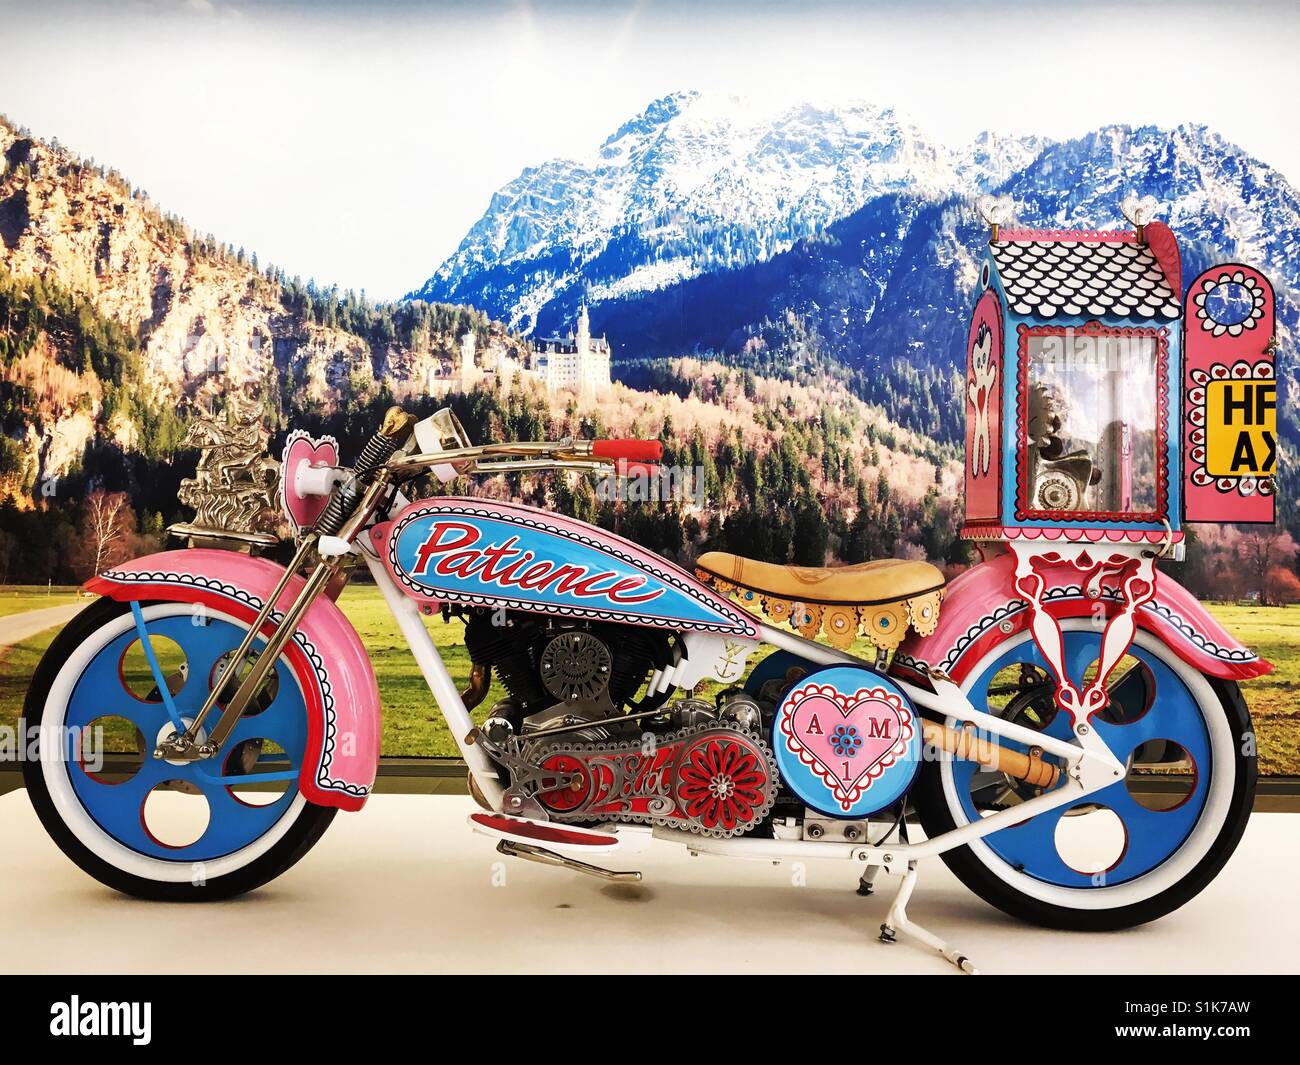 Patience motorcycle by Grayson Perry at the Serpentine Gallery, London, U.K. Stock Photo